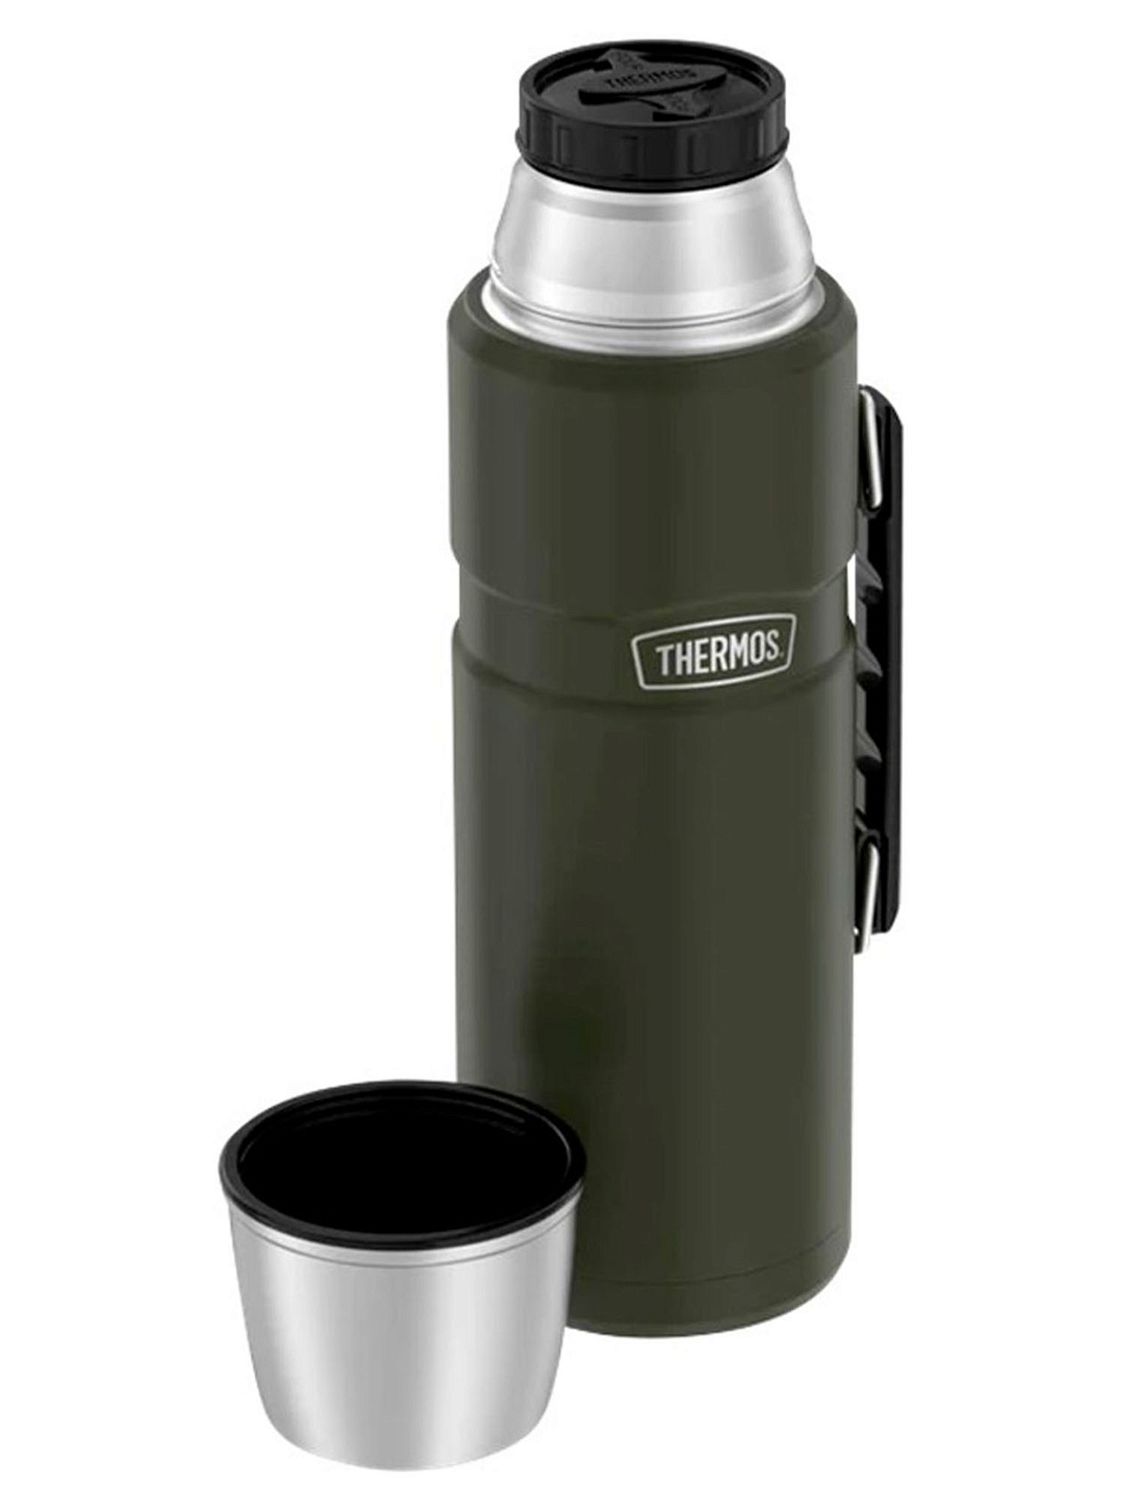 Термос Thermos SK2020 AG 2,0L Хаки